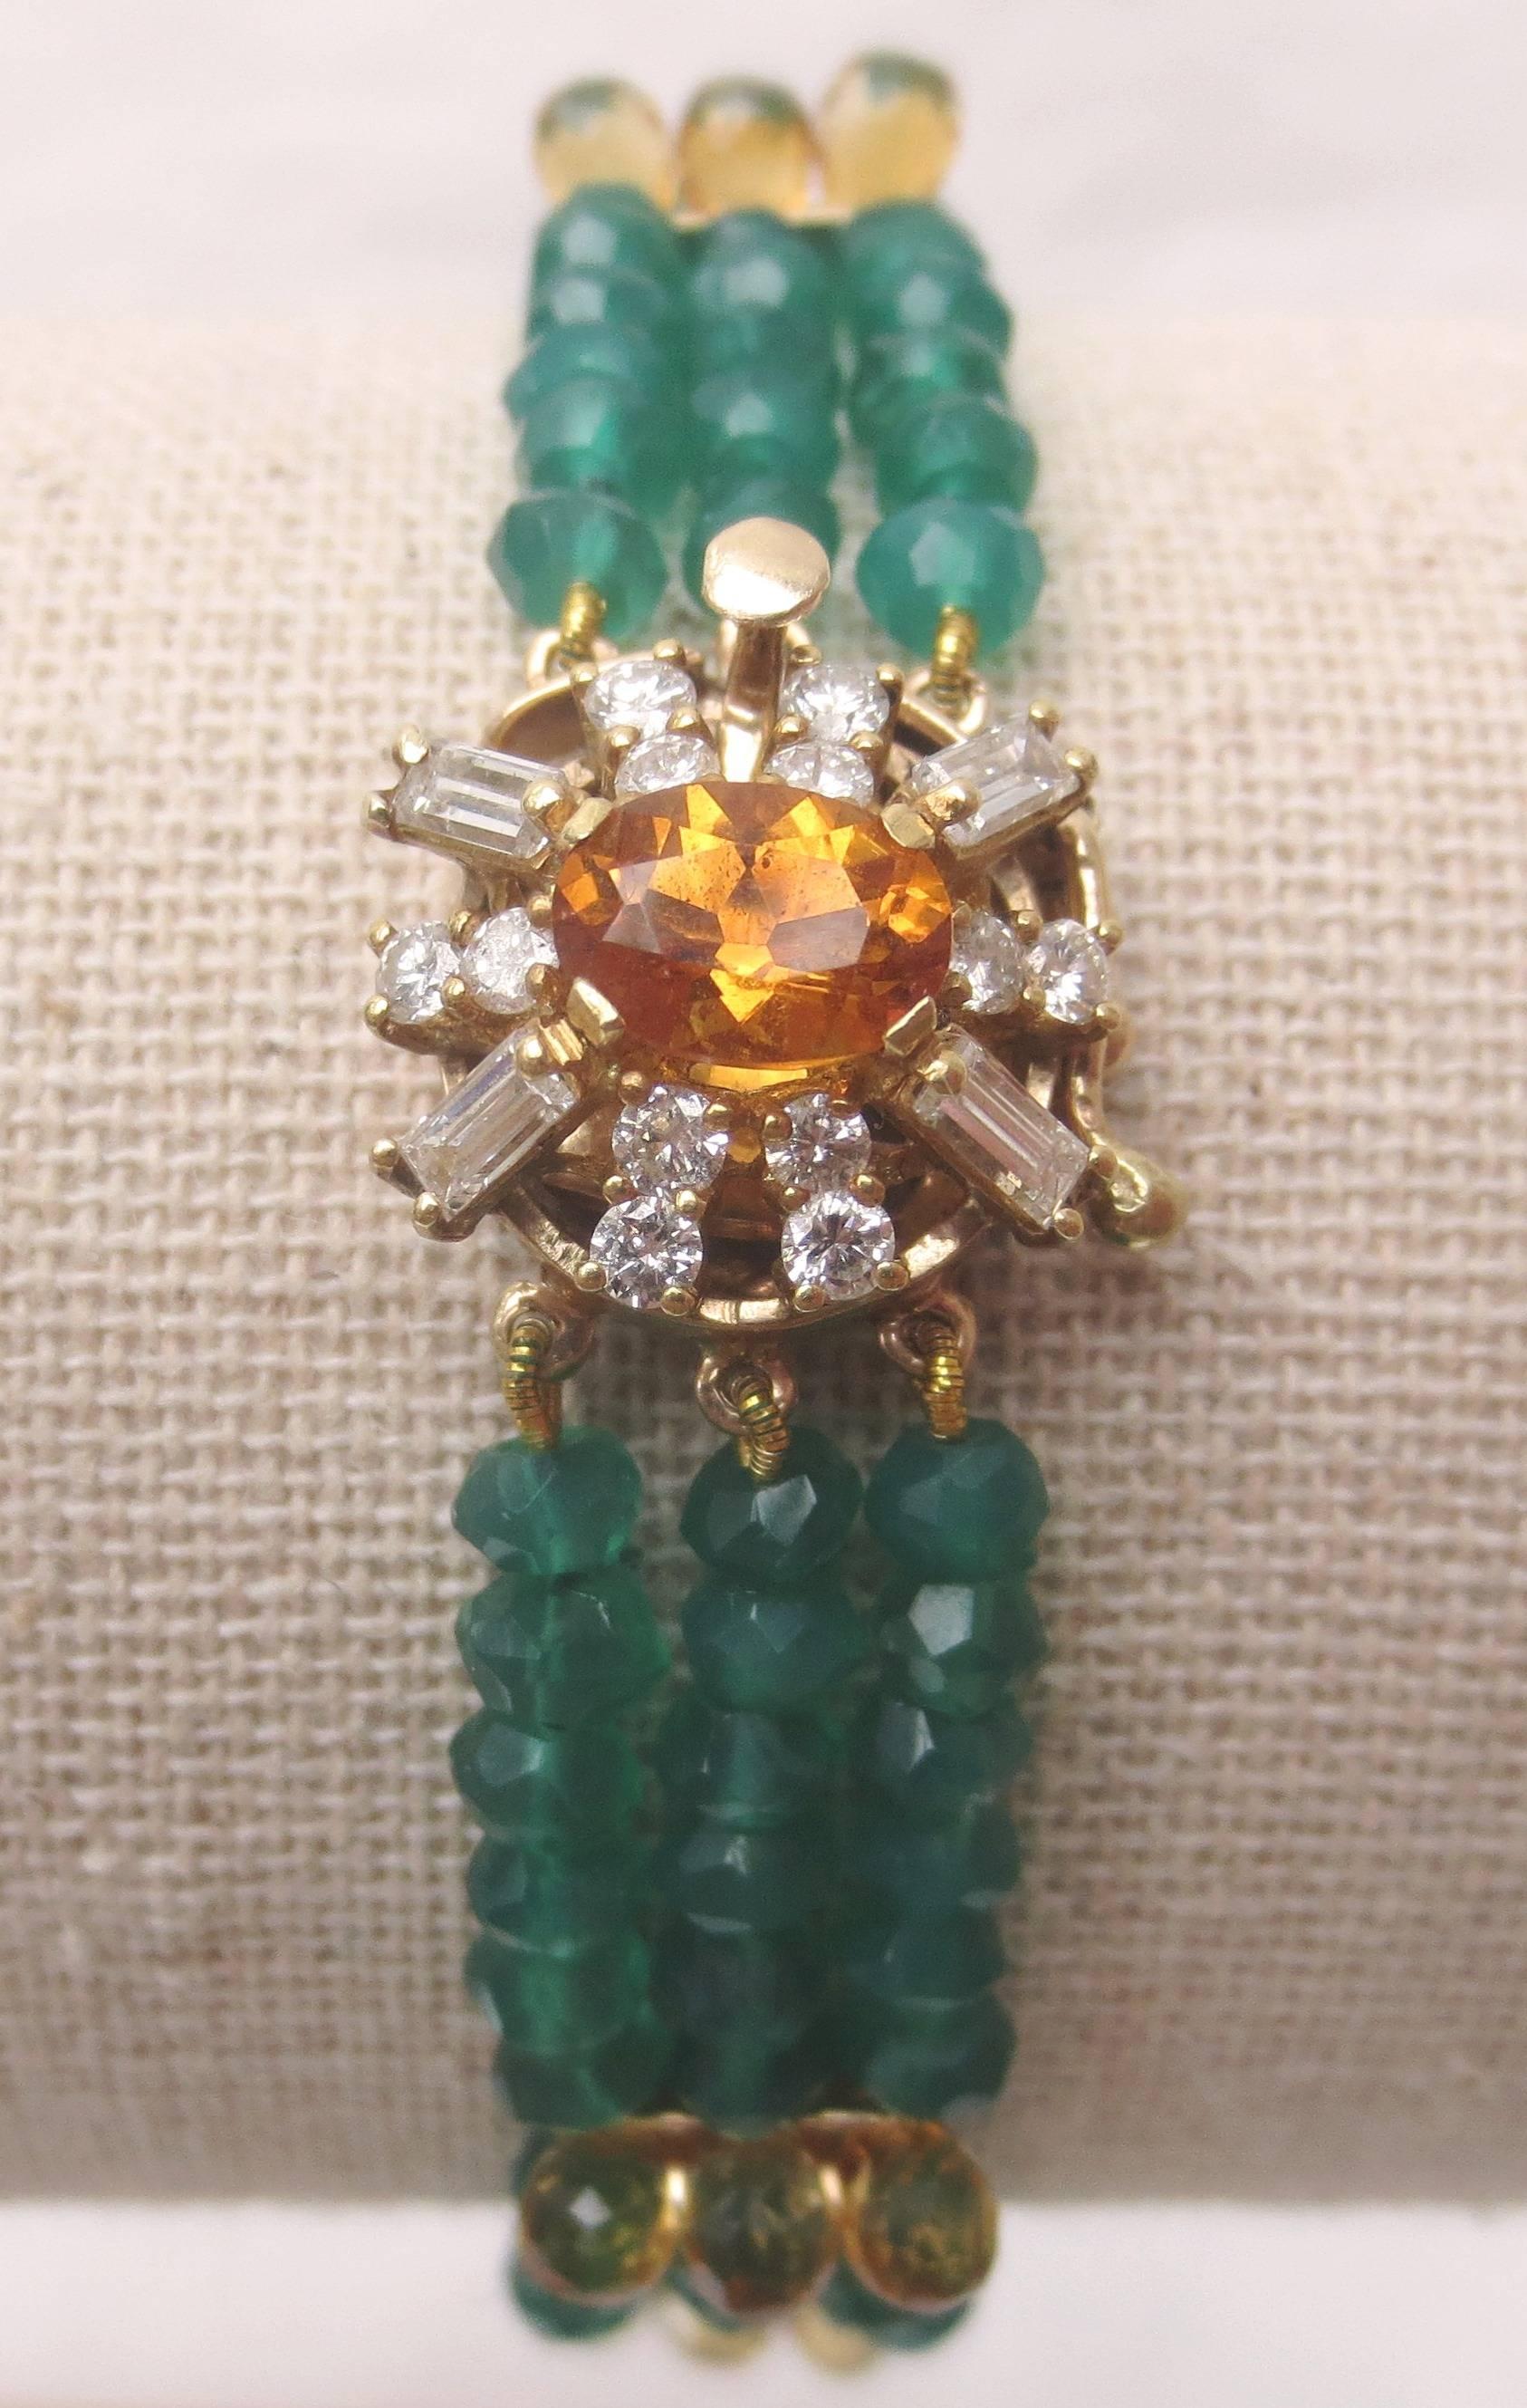 Mid-century diamond, citrine, and 14 k yellow gold clasp serve as the centerpiece for 3 strands of faceted green onyx beads and citrine briolettes. The citrine teardrops are set upright to create a contoured profile that stands out against the